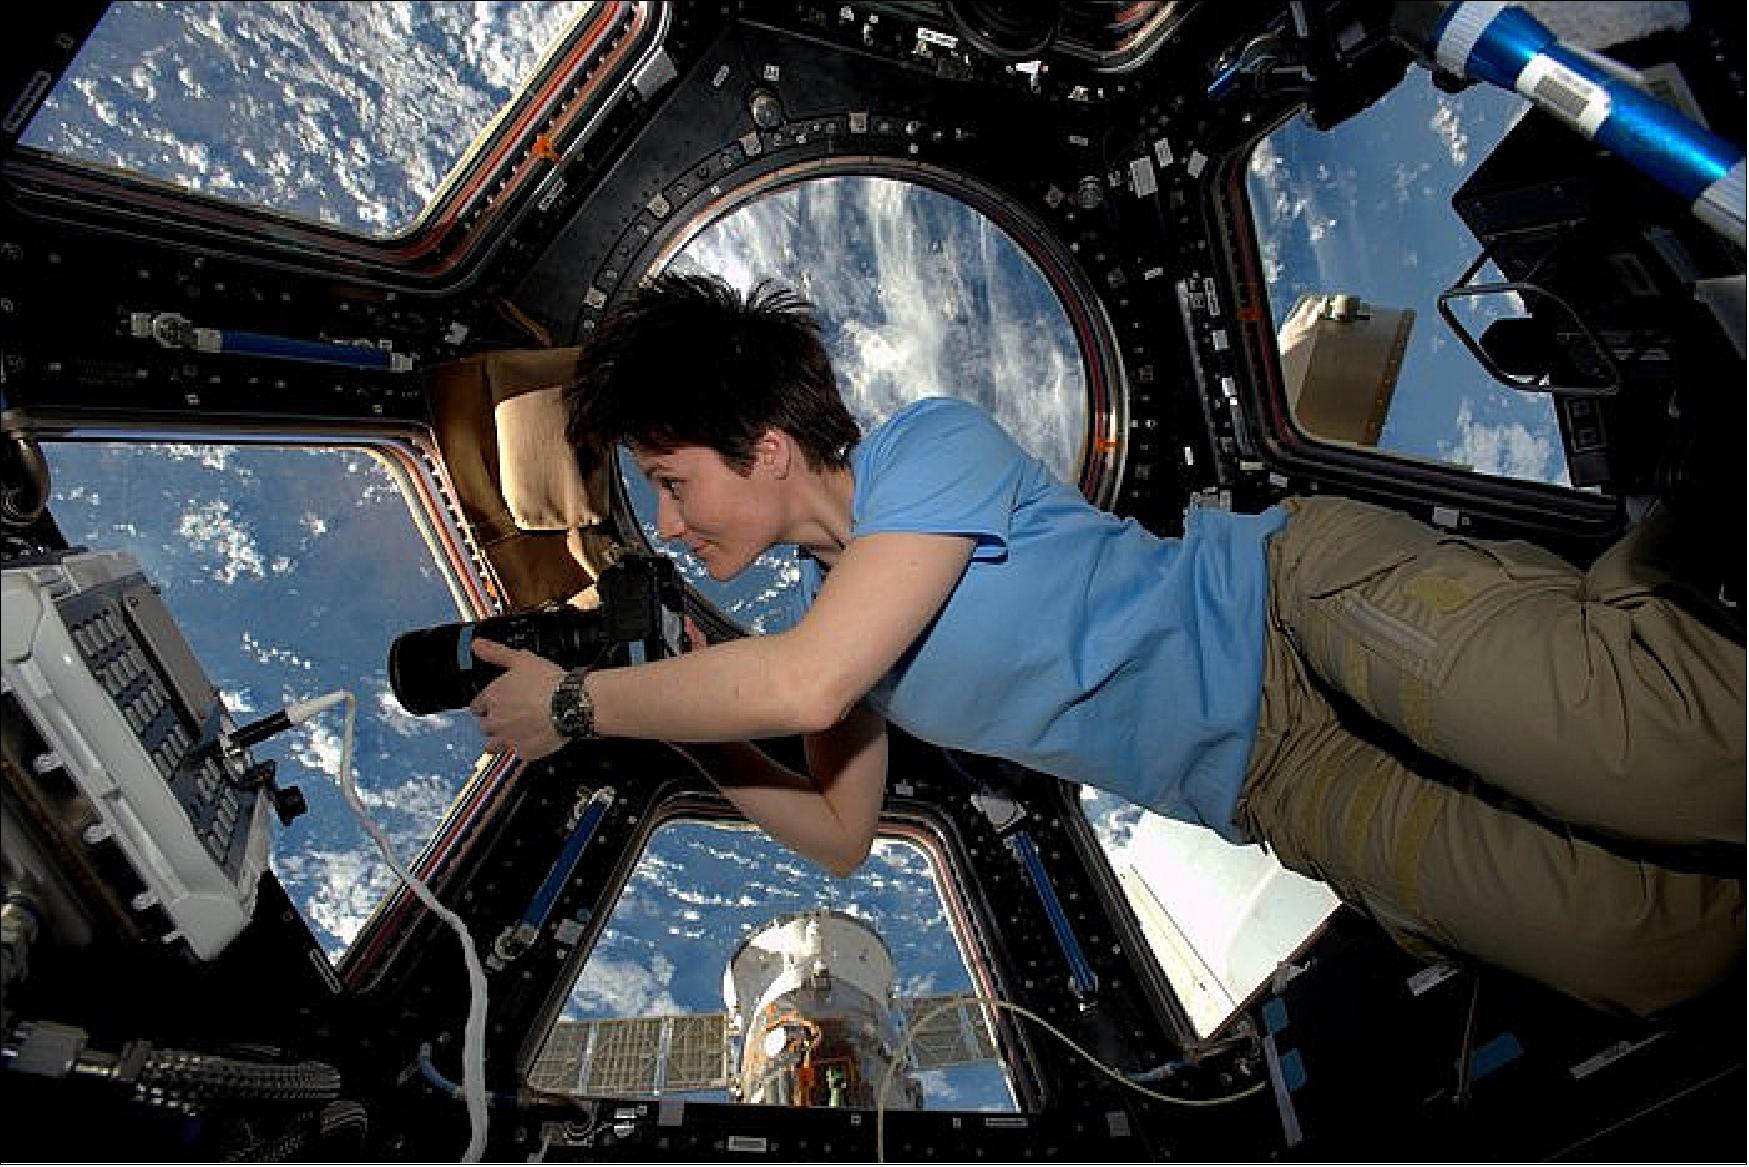 Figure 38: SA astronaut Samantha Cristoforetti on the International Space Station 3 February 2015 during her Futura mission. Samantha is living and working on the Station as part of the Expedition 42 crew (image credit: ESA7NASA)